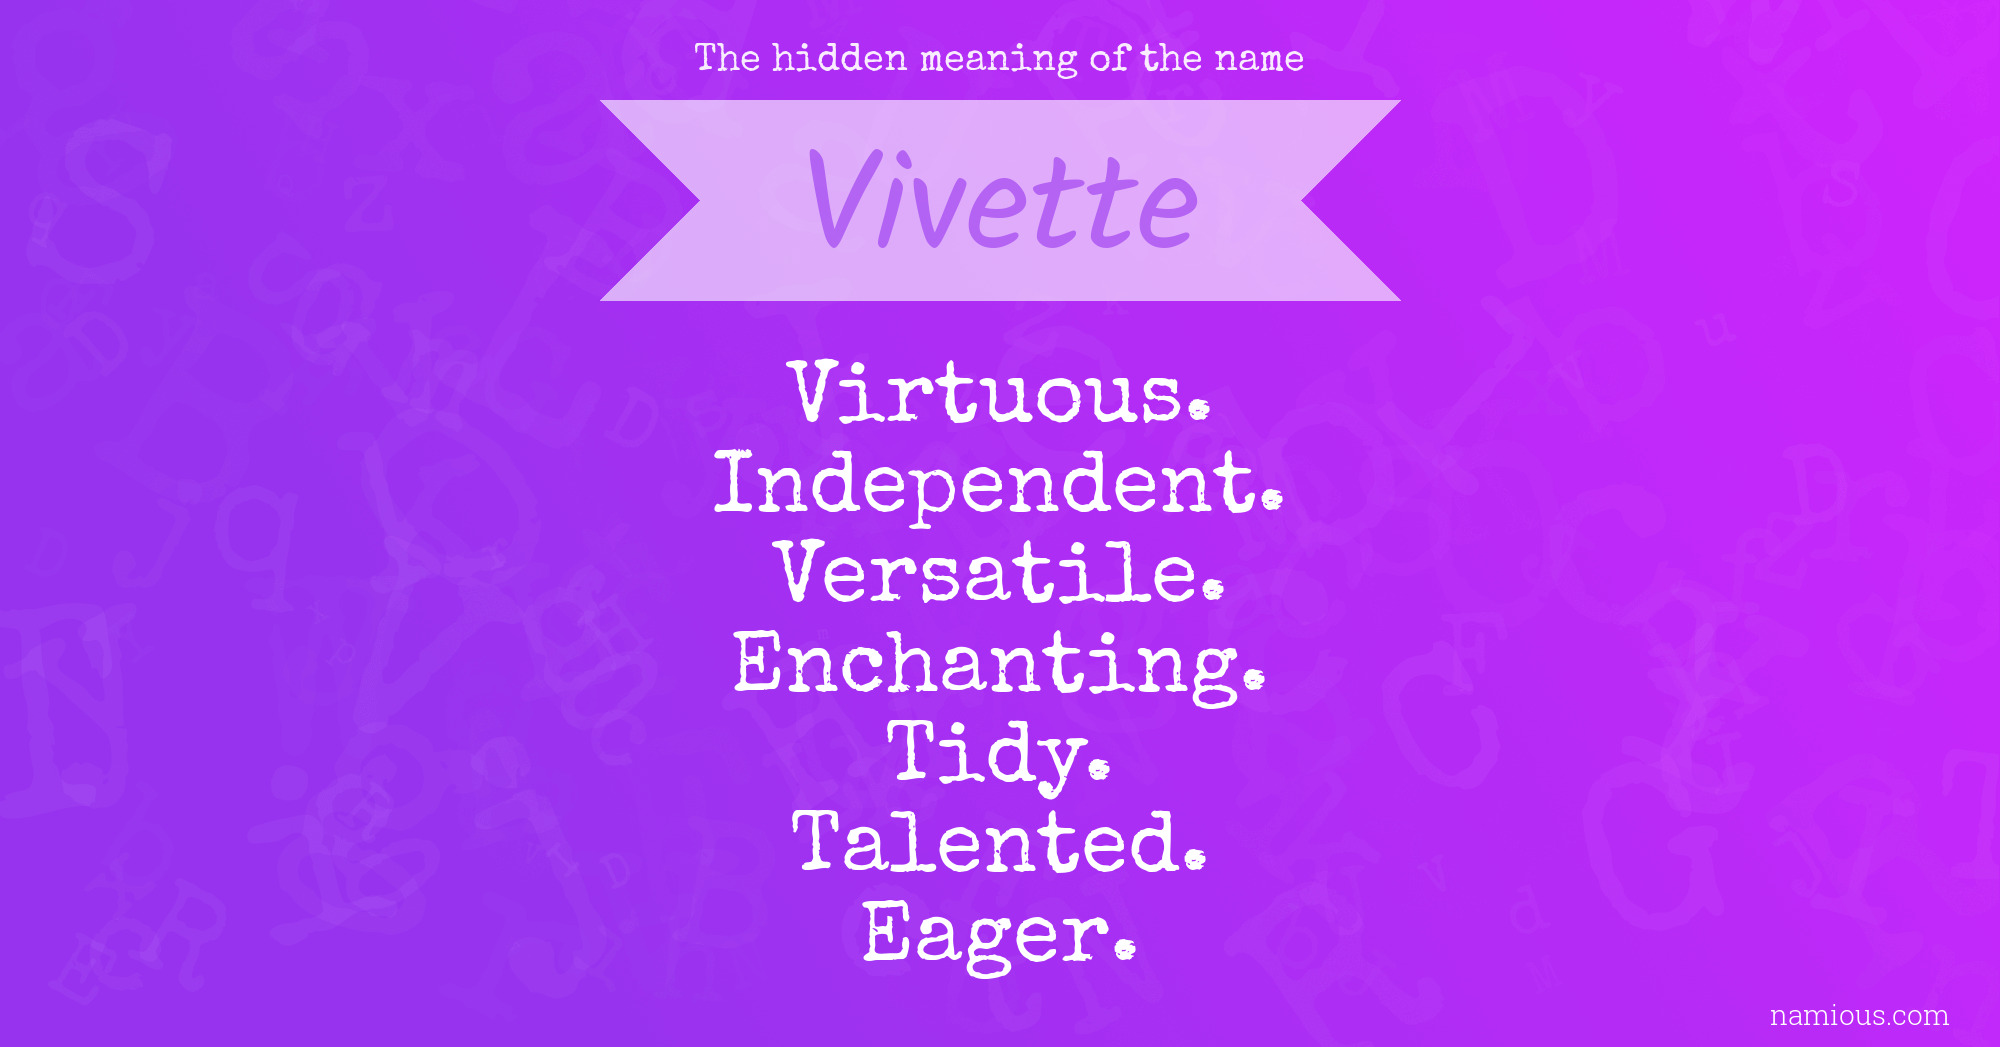 The hidden meaning of the name Vivette | Namious